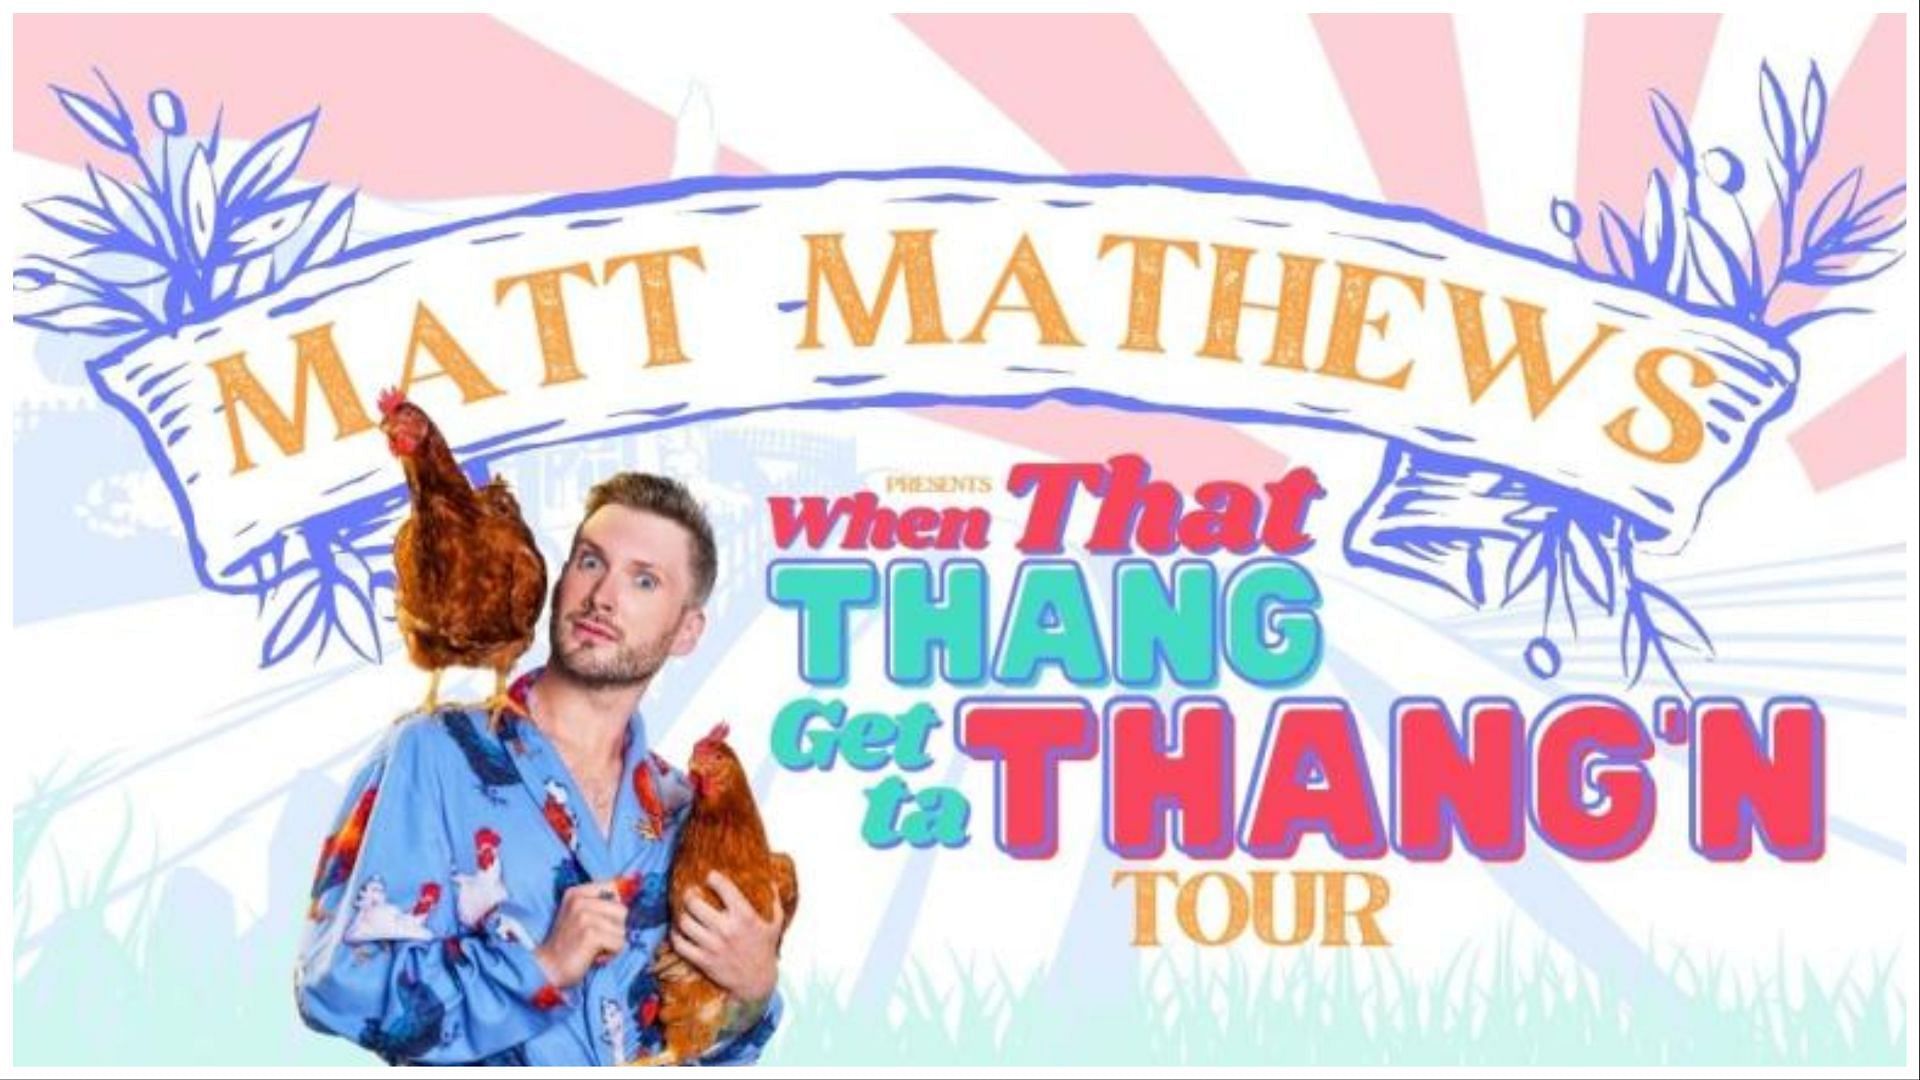 Matt Mathews Comedy Tour 2023 Tickets, where to buy, venues, dates, and all you need to know